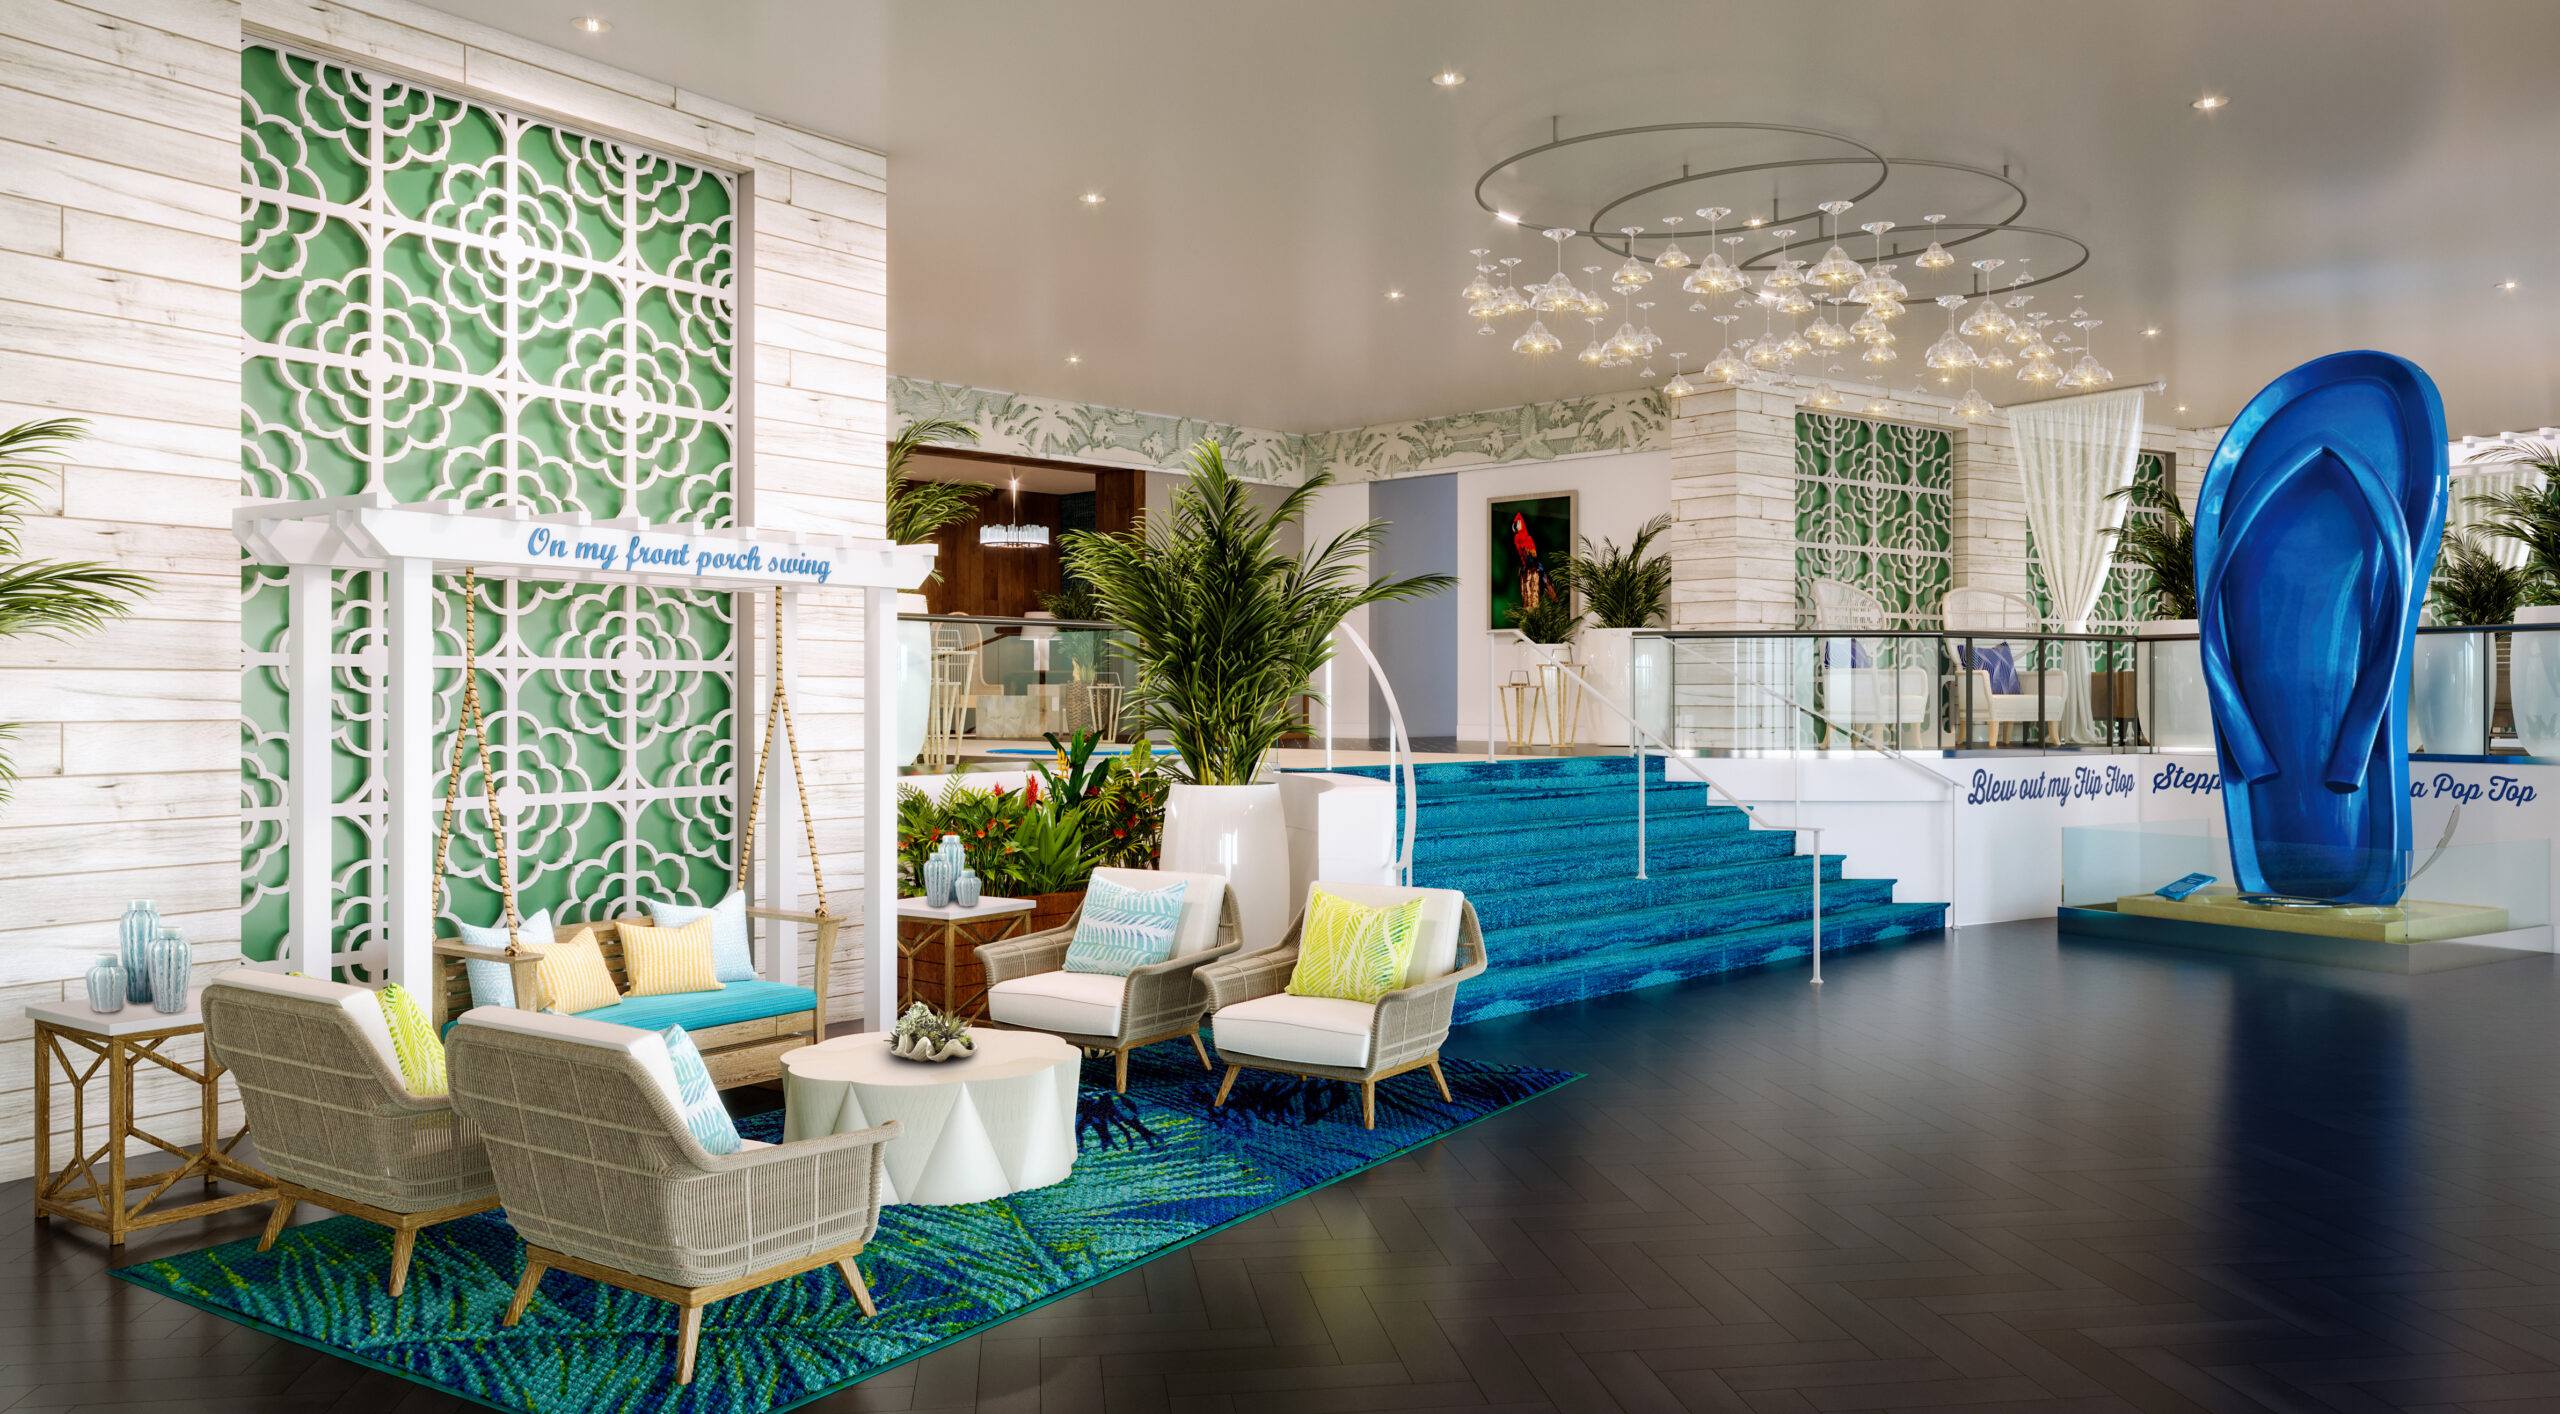 Séc-he, A 5-Star Luxury Spa, Opens In Downtown Palm Springs